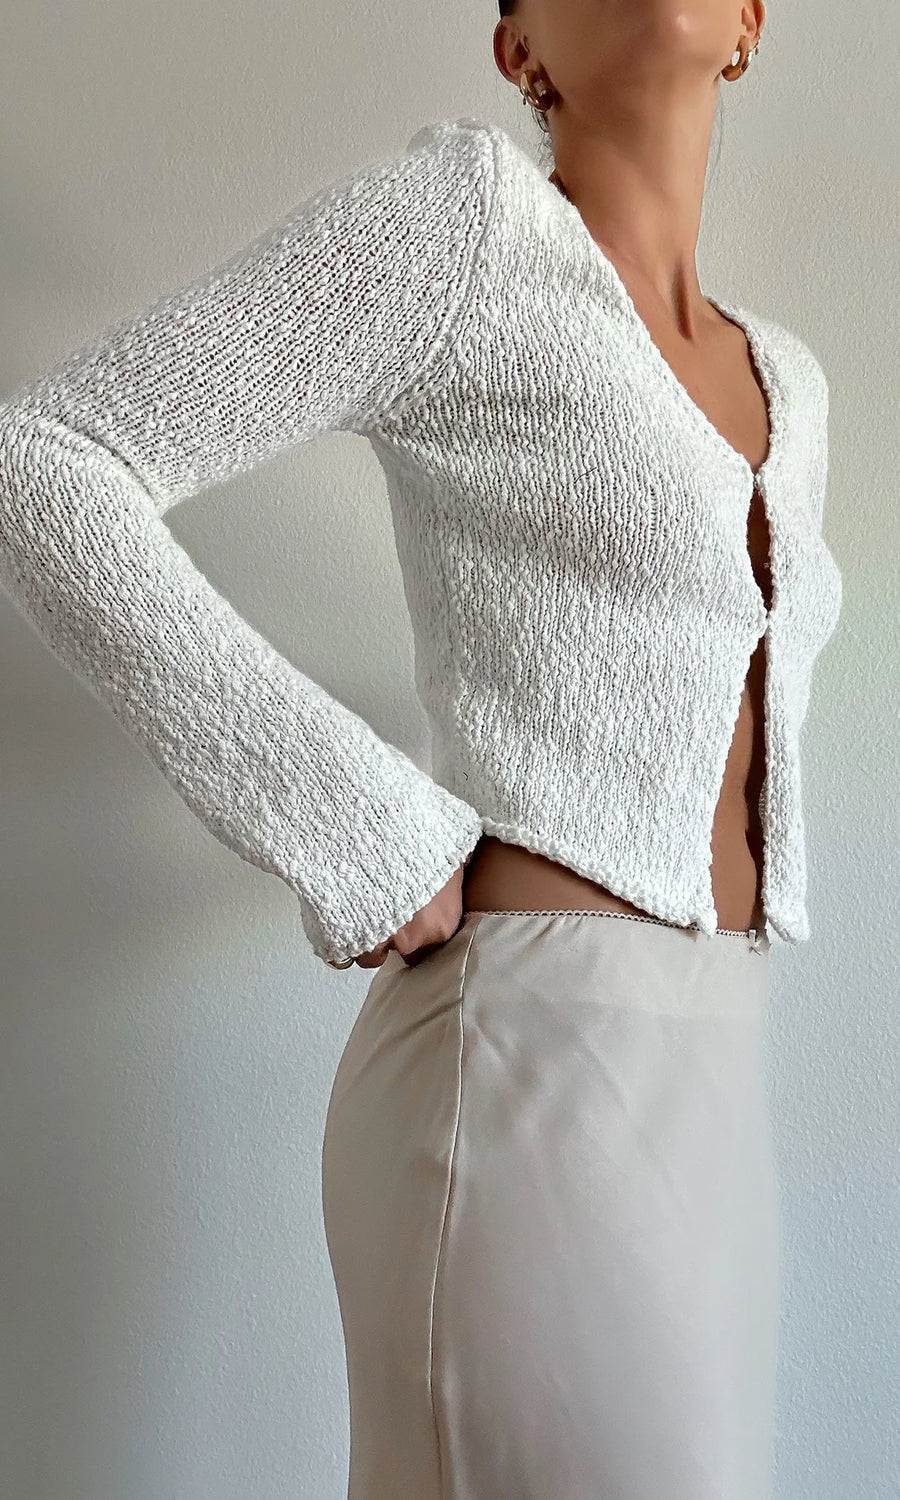 Long sleeve, open-front top with hook and eye closure. 